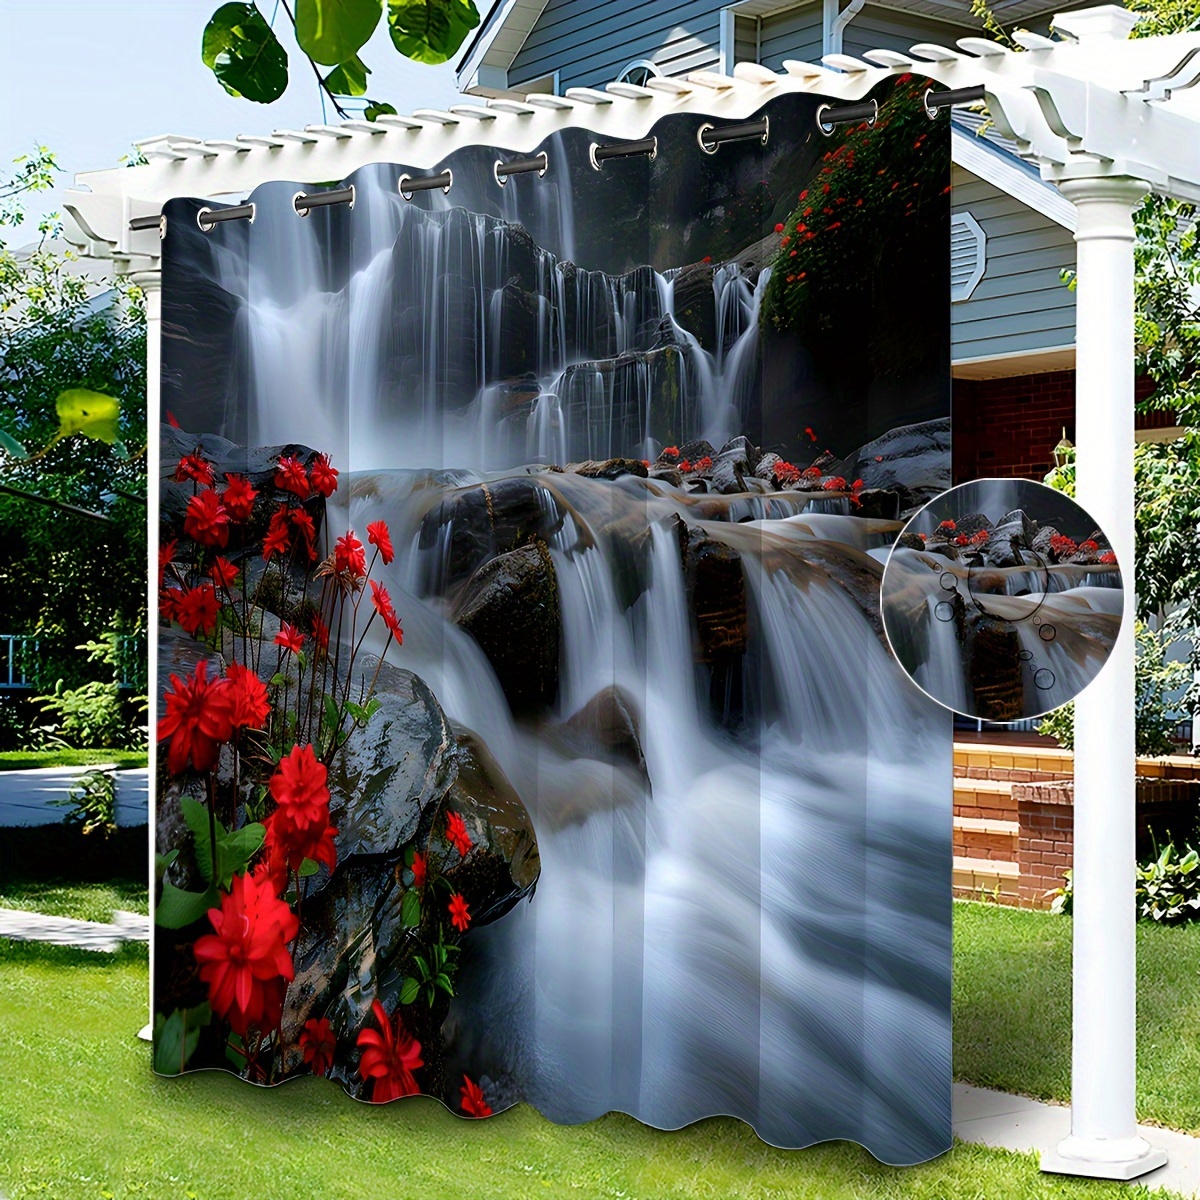 

1pc Waterfall Floral Outdoor Curtain - Waterproof & Oil-resistant, Modern Garden Gazebo Sunshade With Grommet Top For Easy Hanging